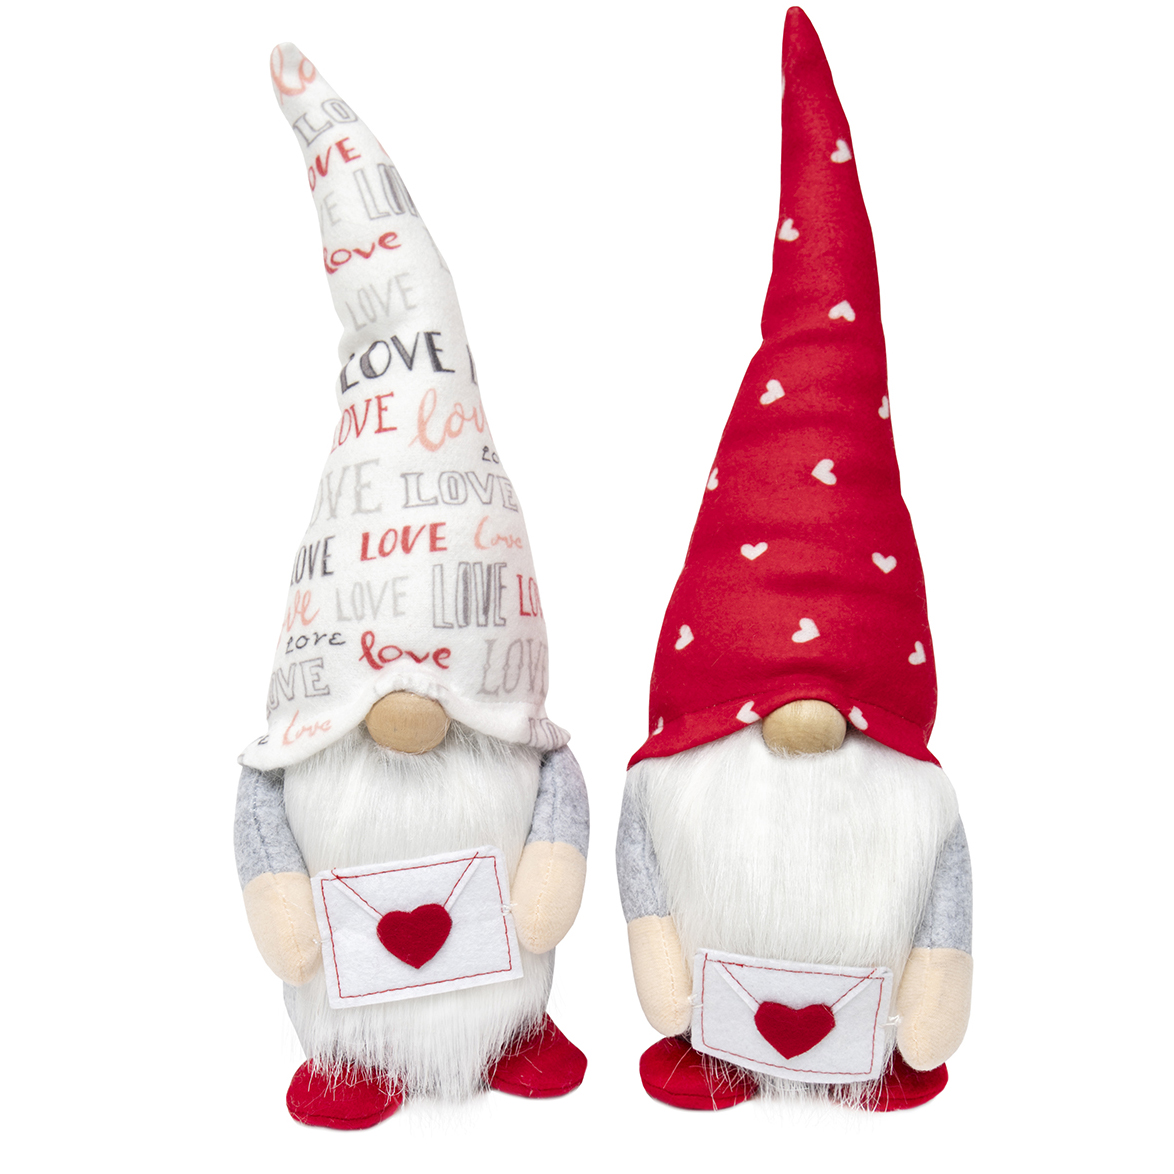 Luv Gnome with Envelope, Wood Nose Set of 2